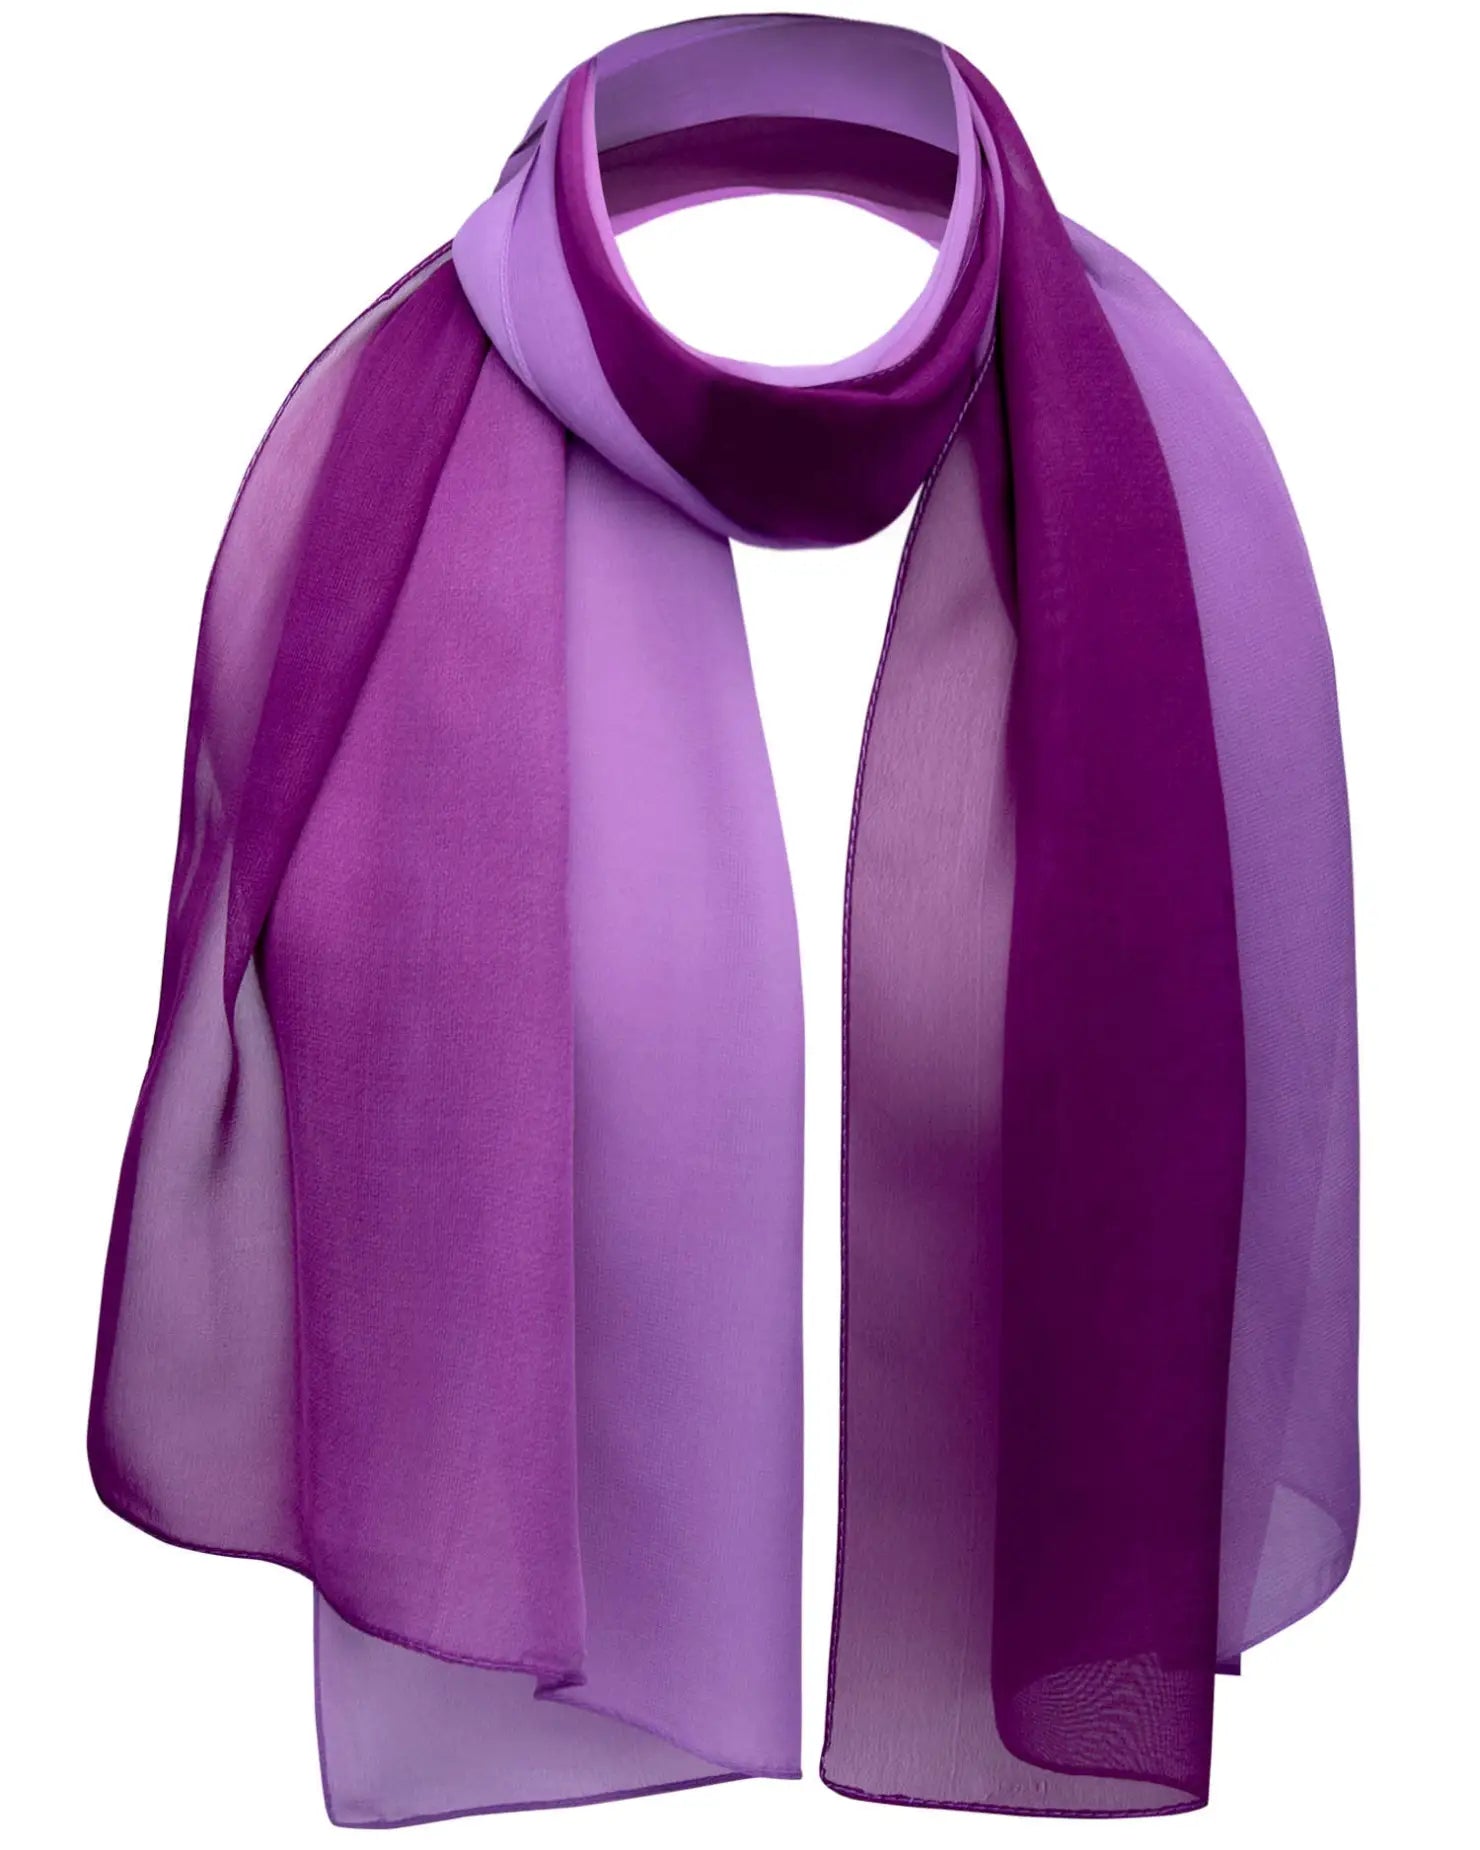 Two-Tone Chiffon Scarf in Purple and White Gradient Pattern